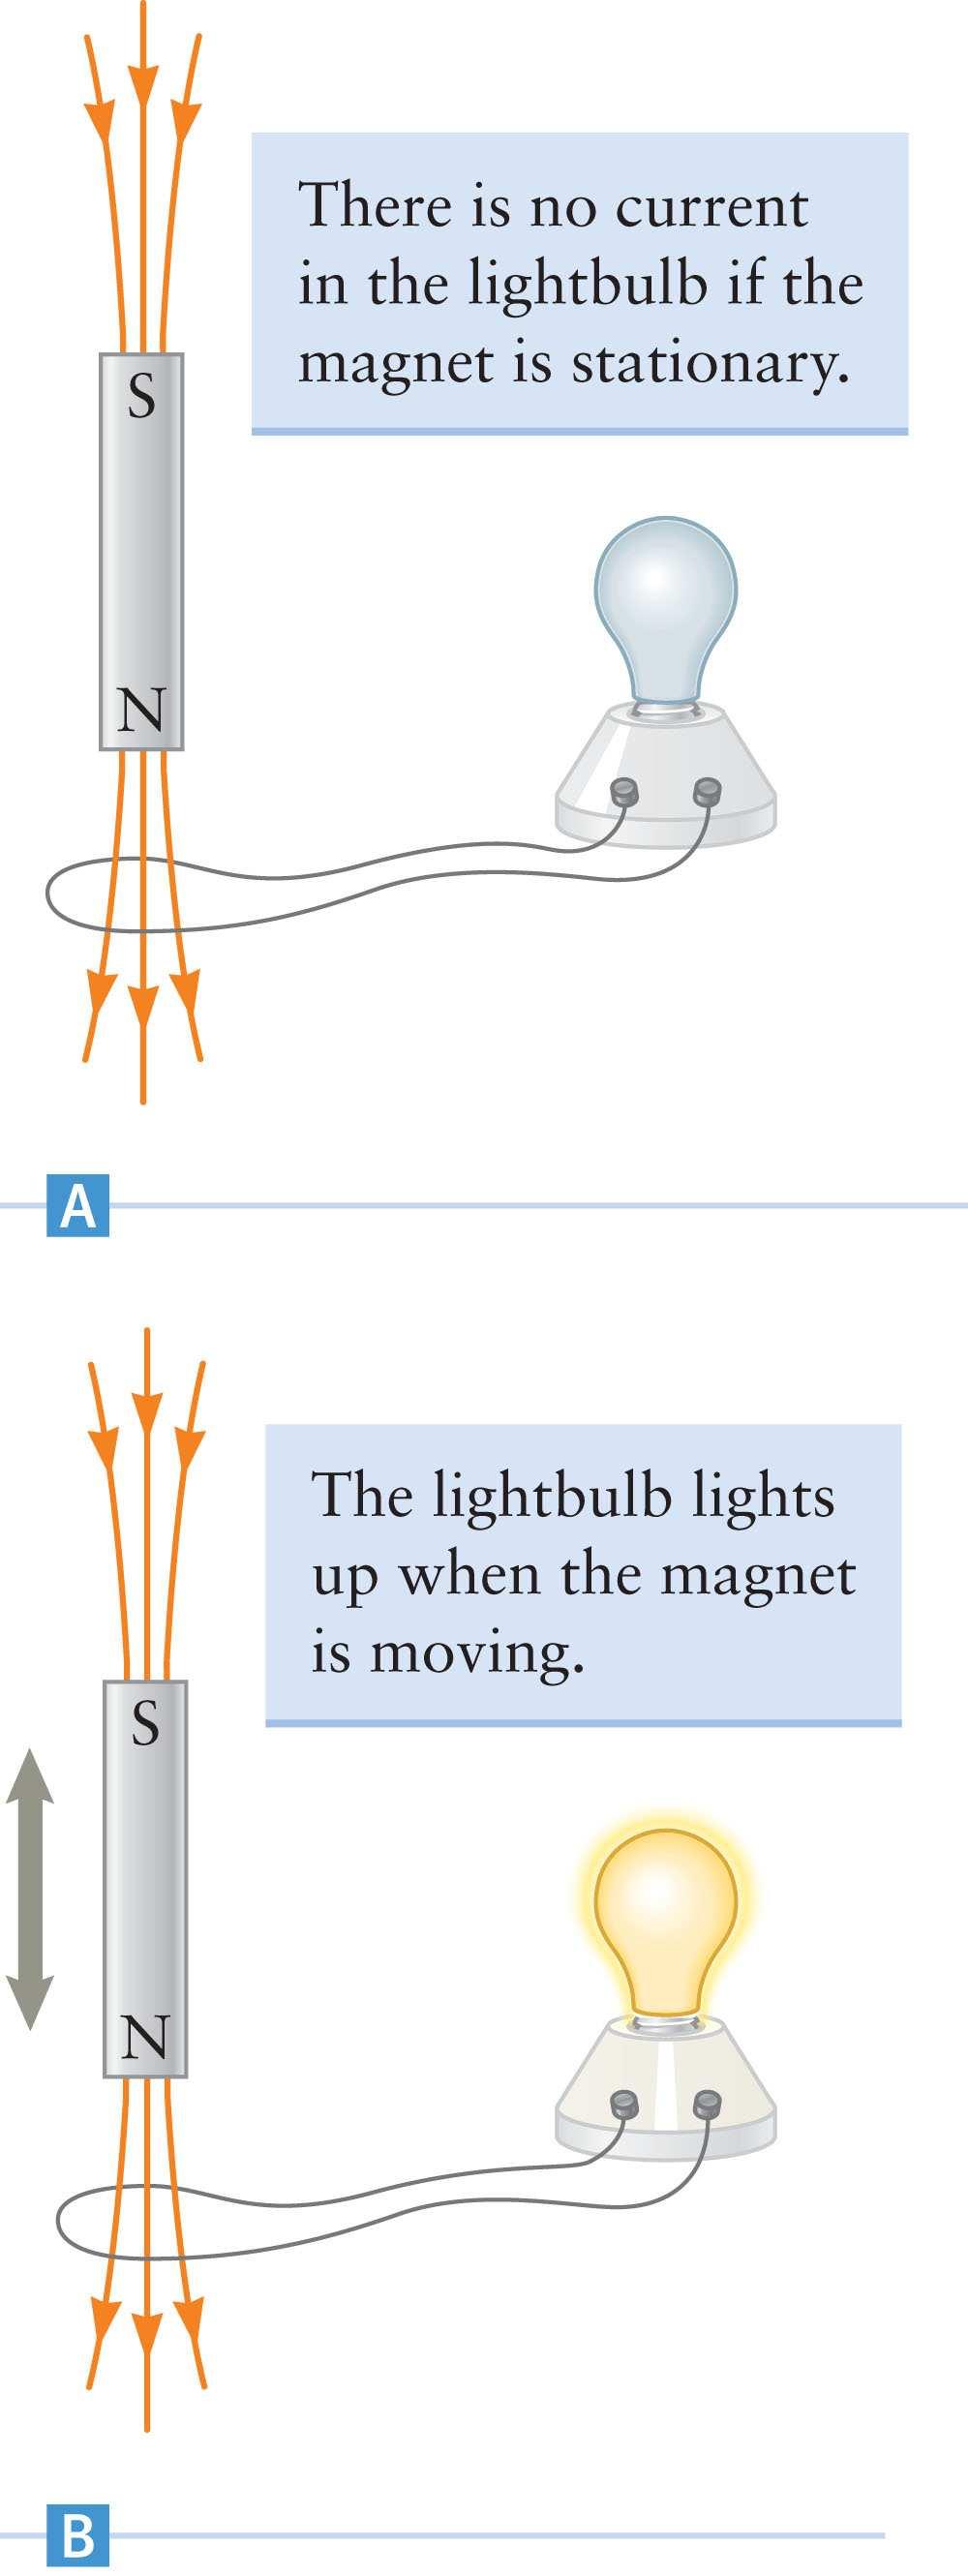 Force on a Torque on a Michael Faraday attempted to observe an induced electric field. He did not use a light bulb.